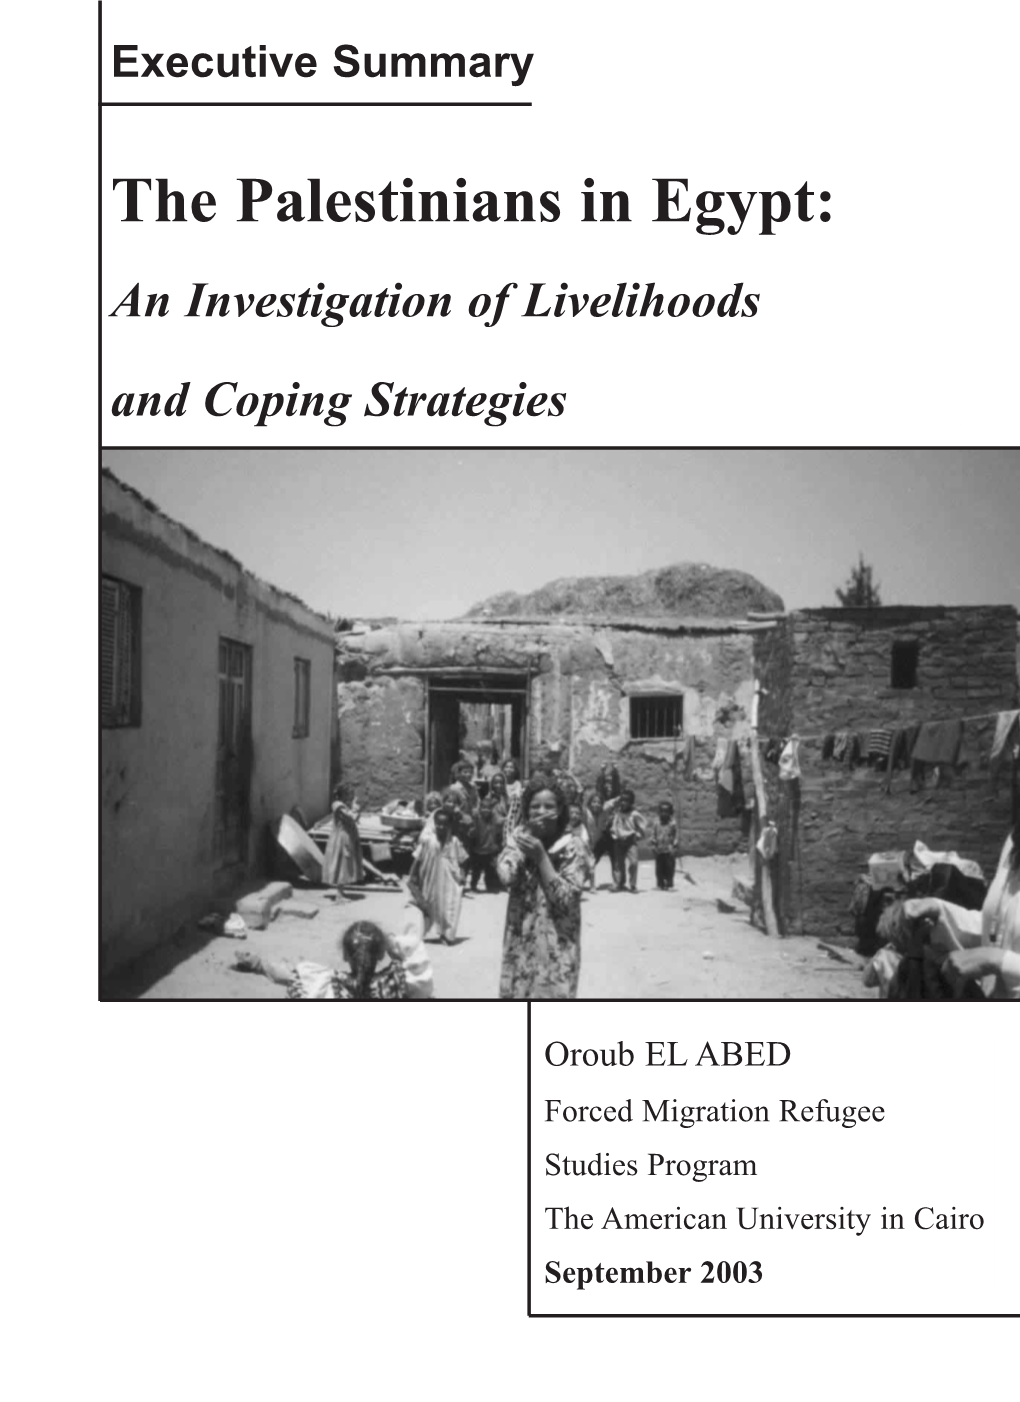 The Palestinians in Egypt: an Investigation of Livelihoods and Coping Strategies